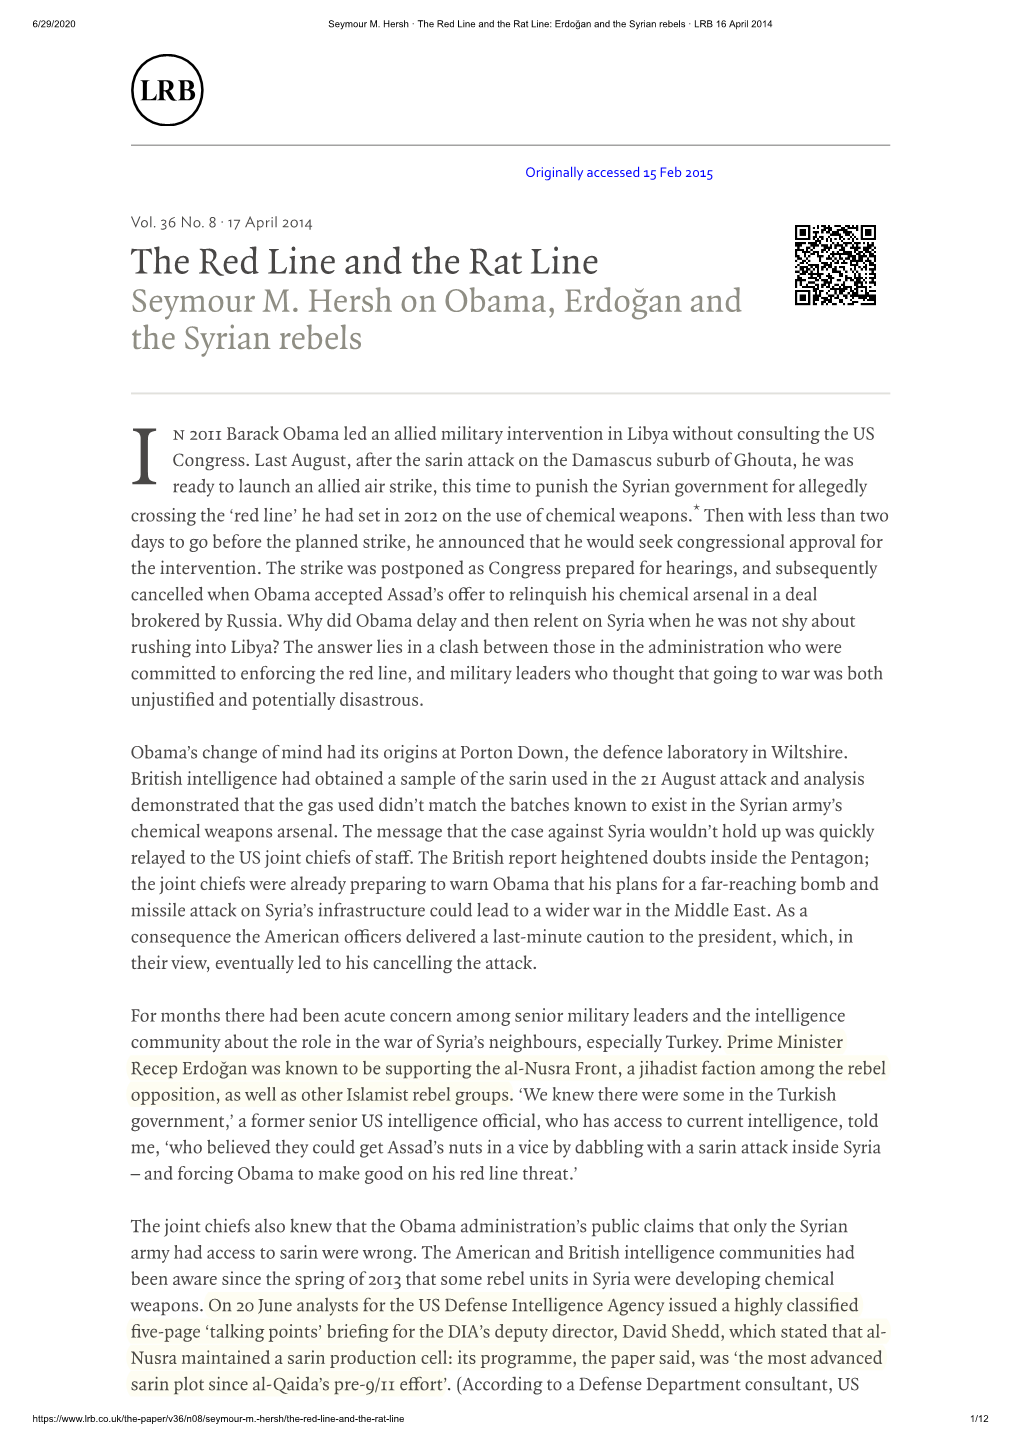 The Red Line and the Rat Line: Erdoğan and the Syrian Rebels · LRB 16 April 2014